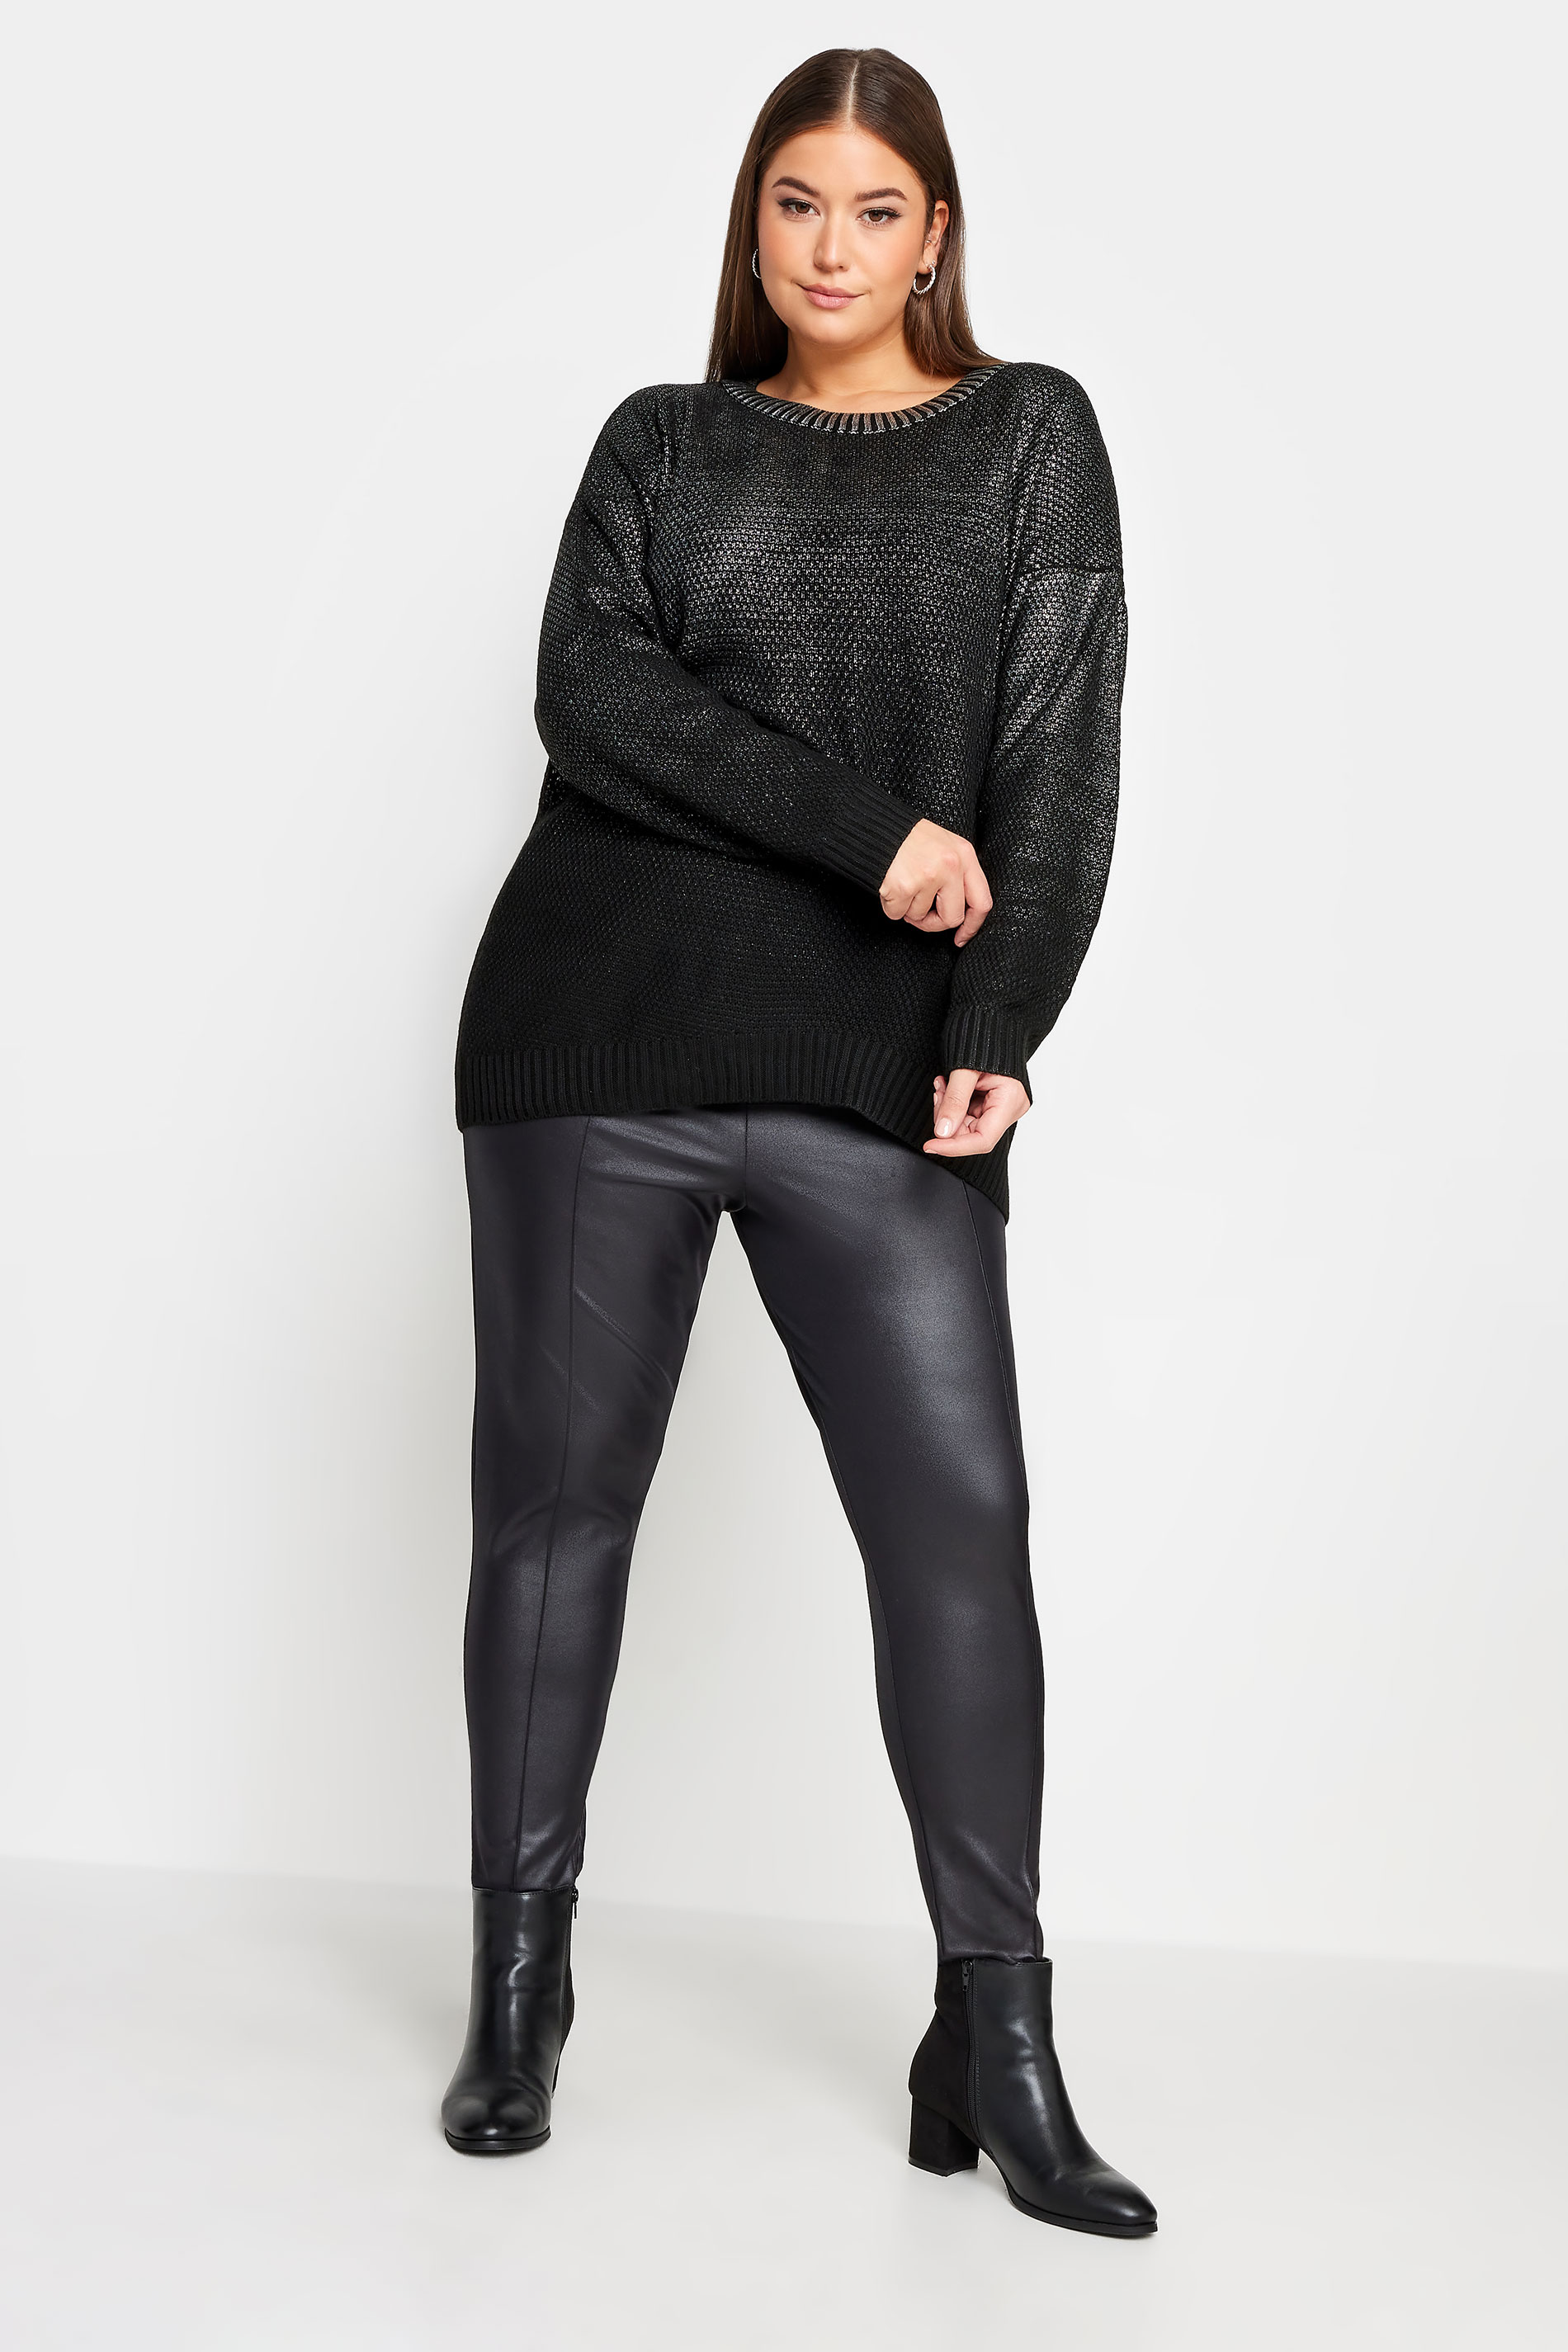 YOURS Curve Black Metallic Jumper | Yours Clothing 2